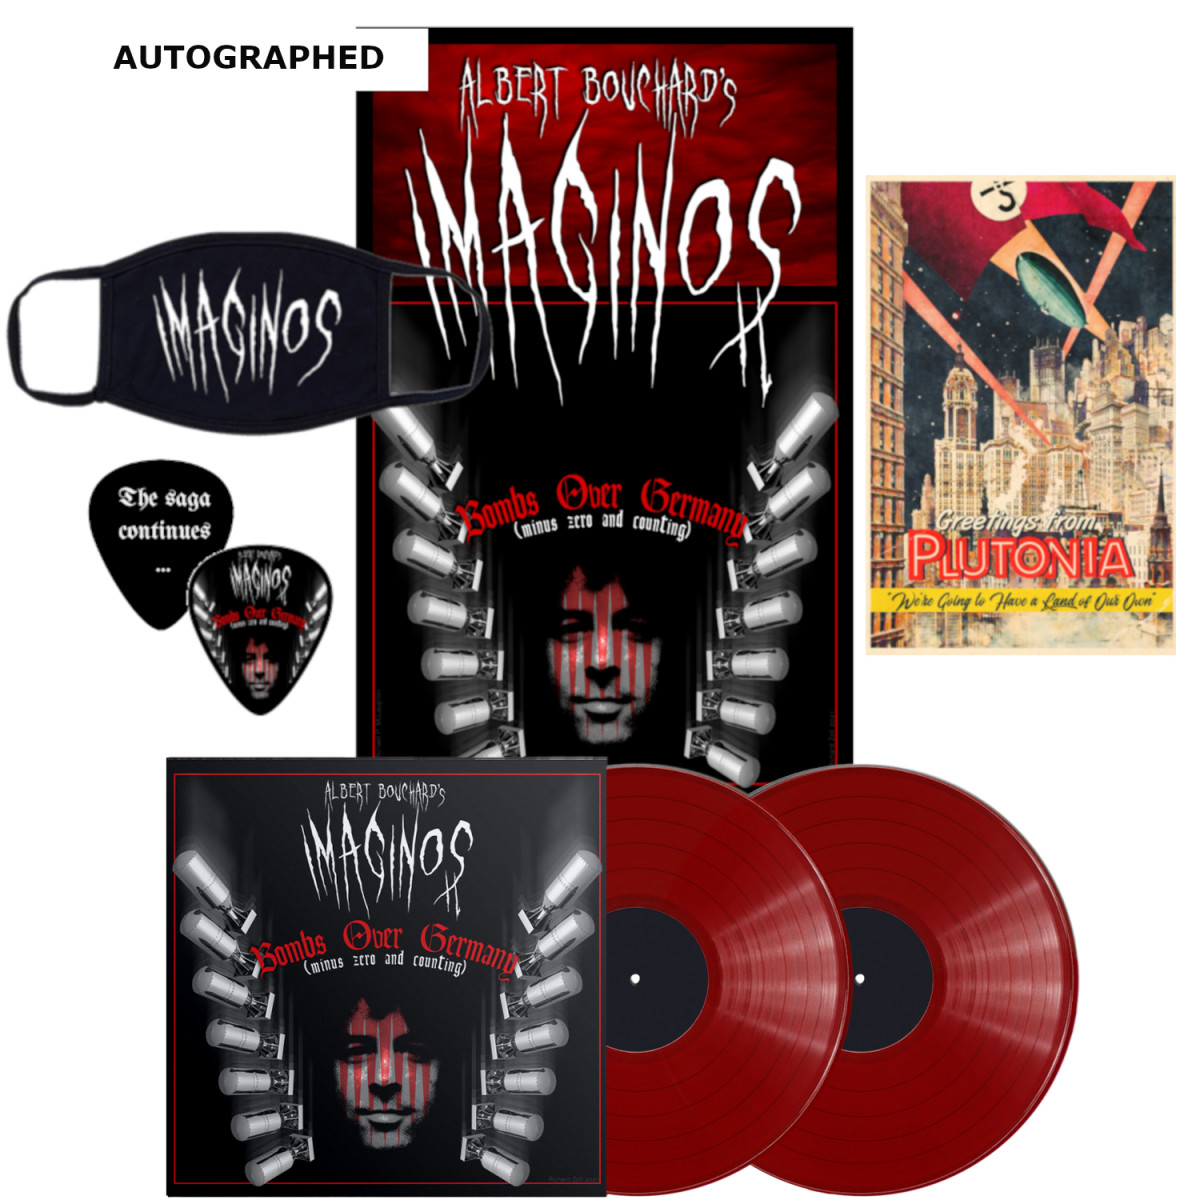 Imaginos 2 – Bombs Over Germany (minus zero and counting) on Ruby Red vinyl in the Goldmine exclusive bundle. 